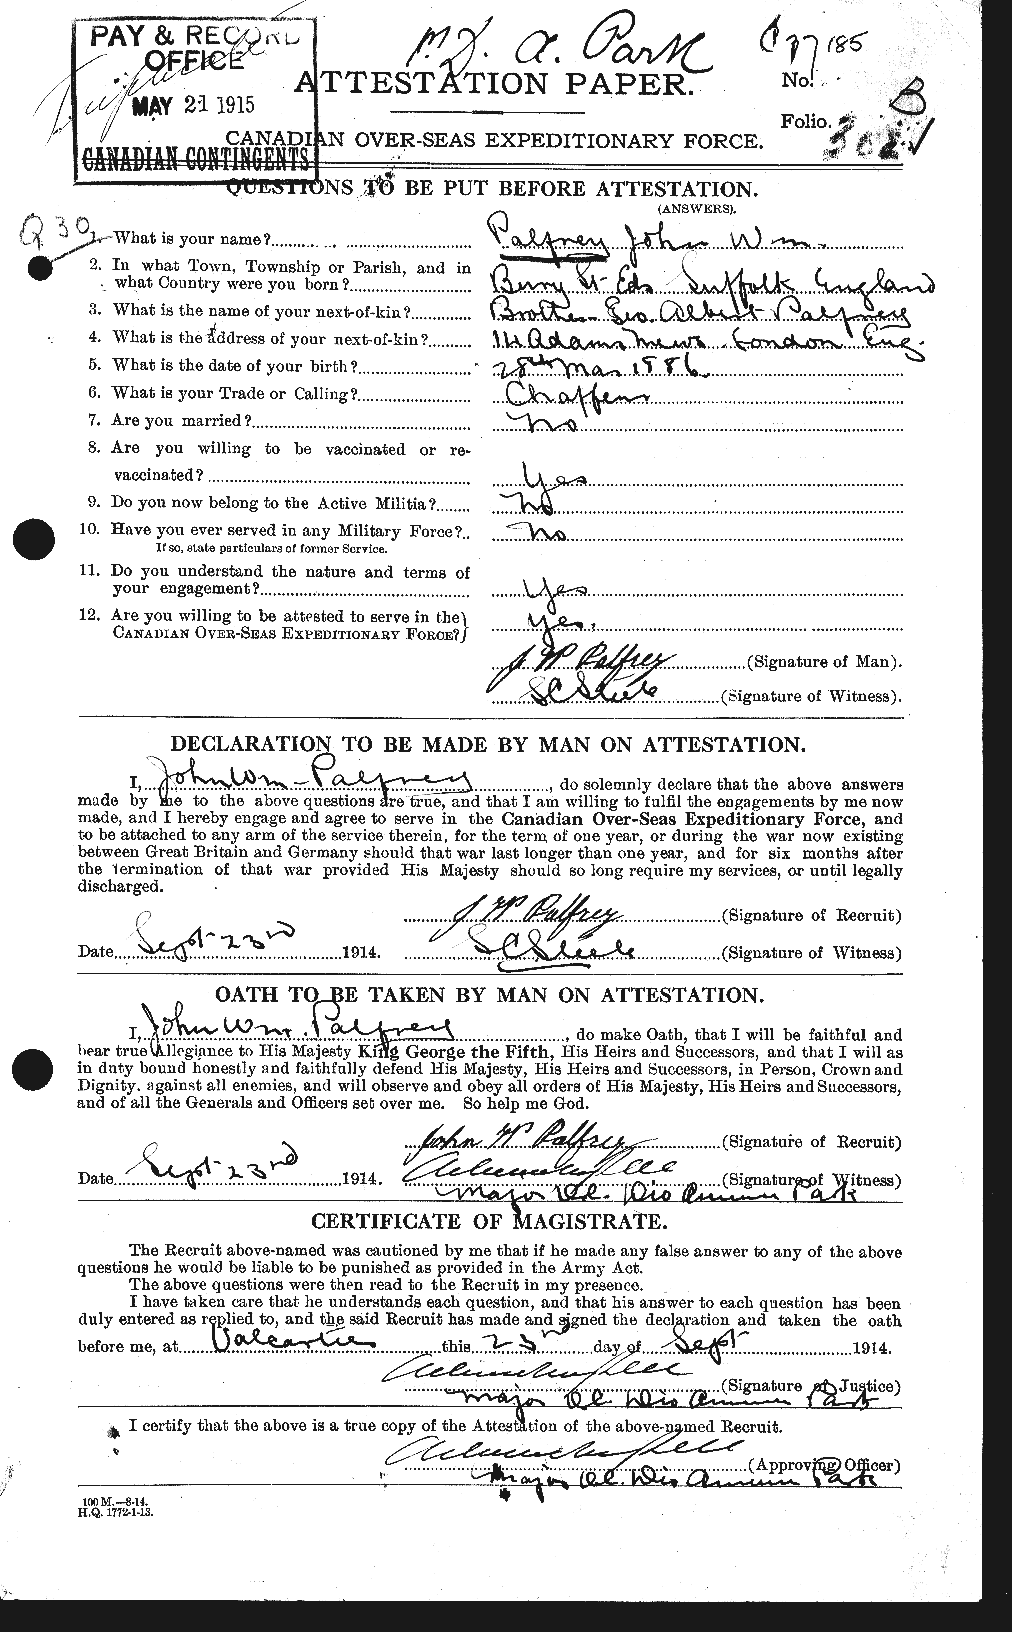 Personnel Records of the First World War - CEF 562634a